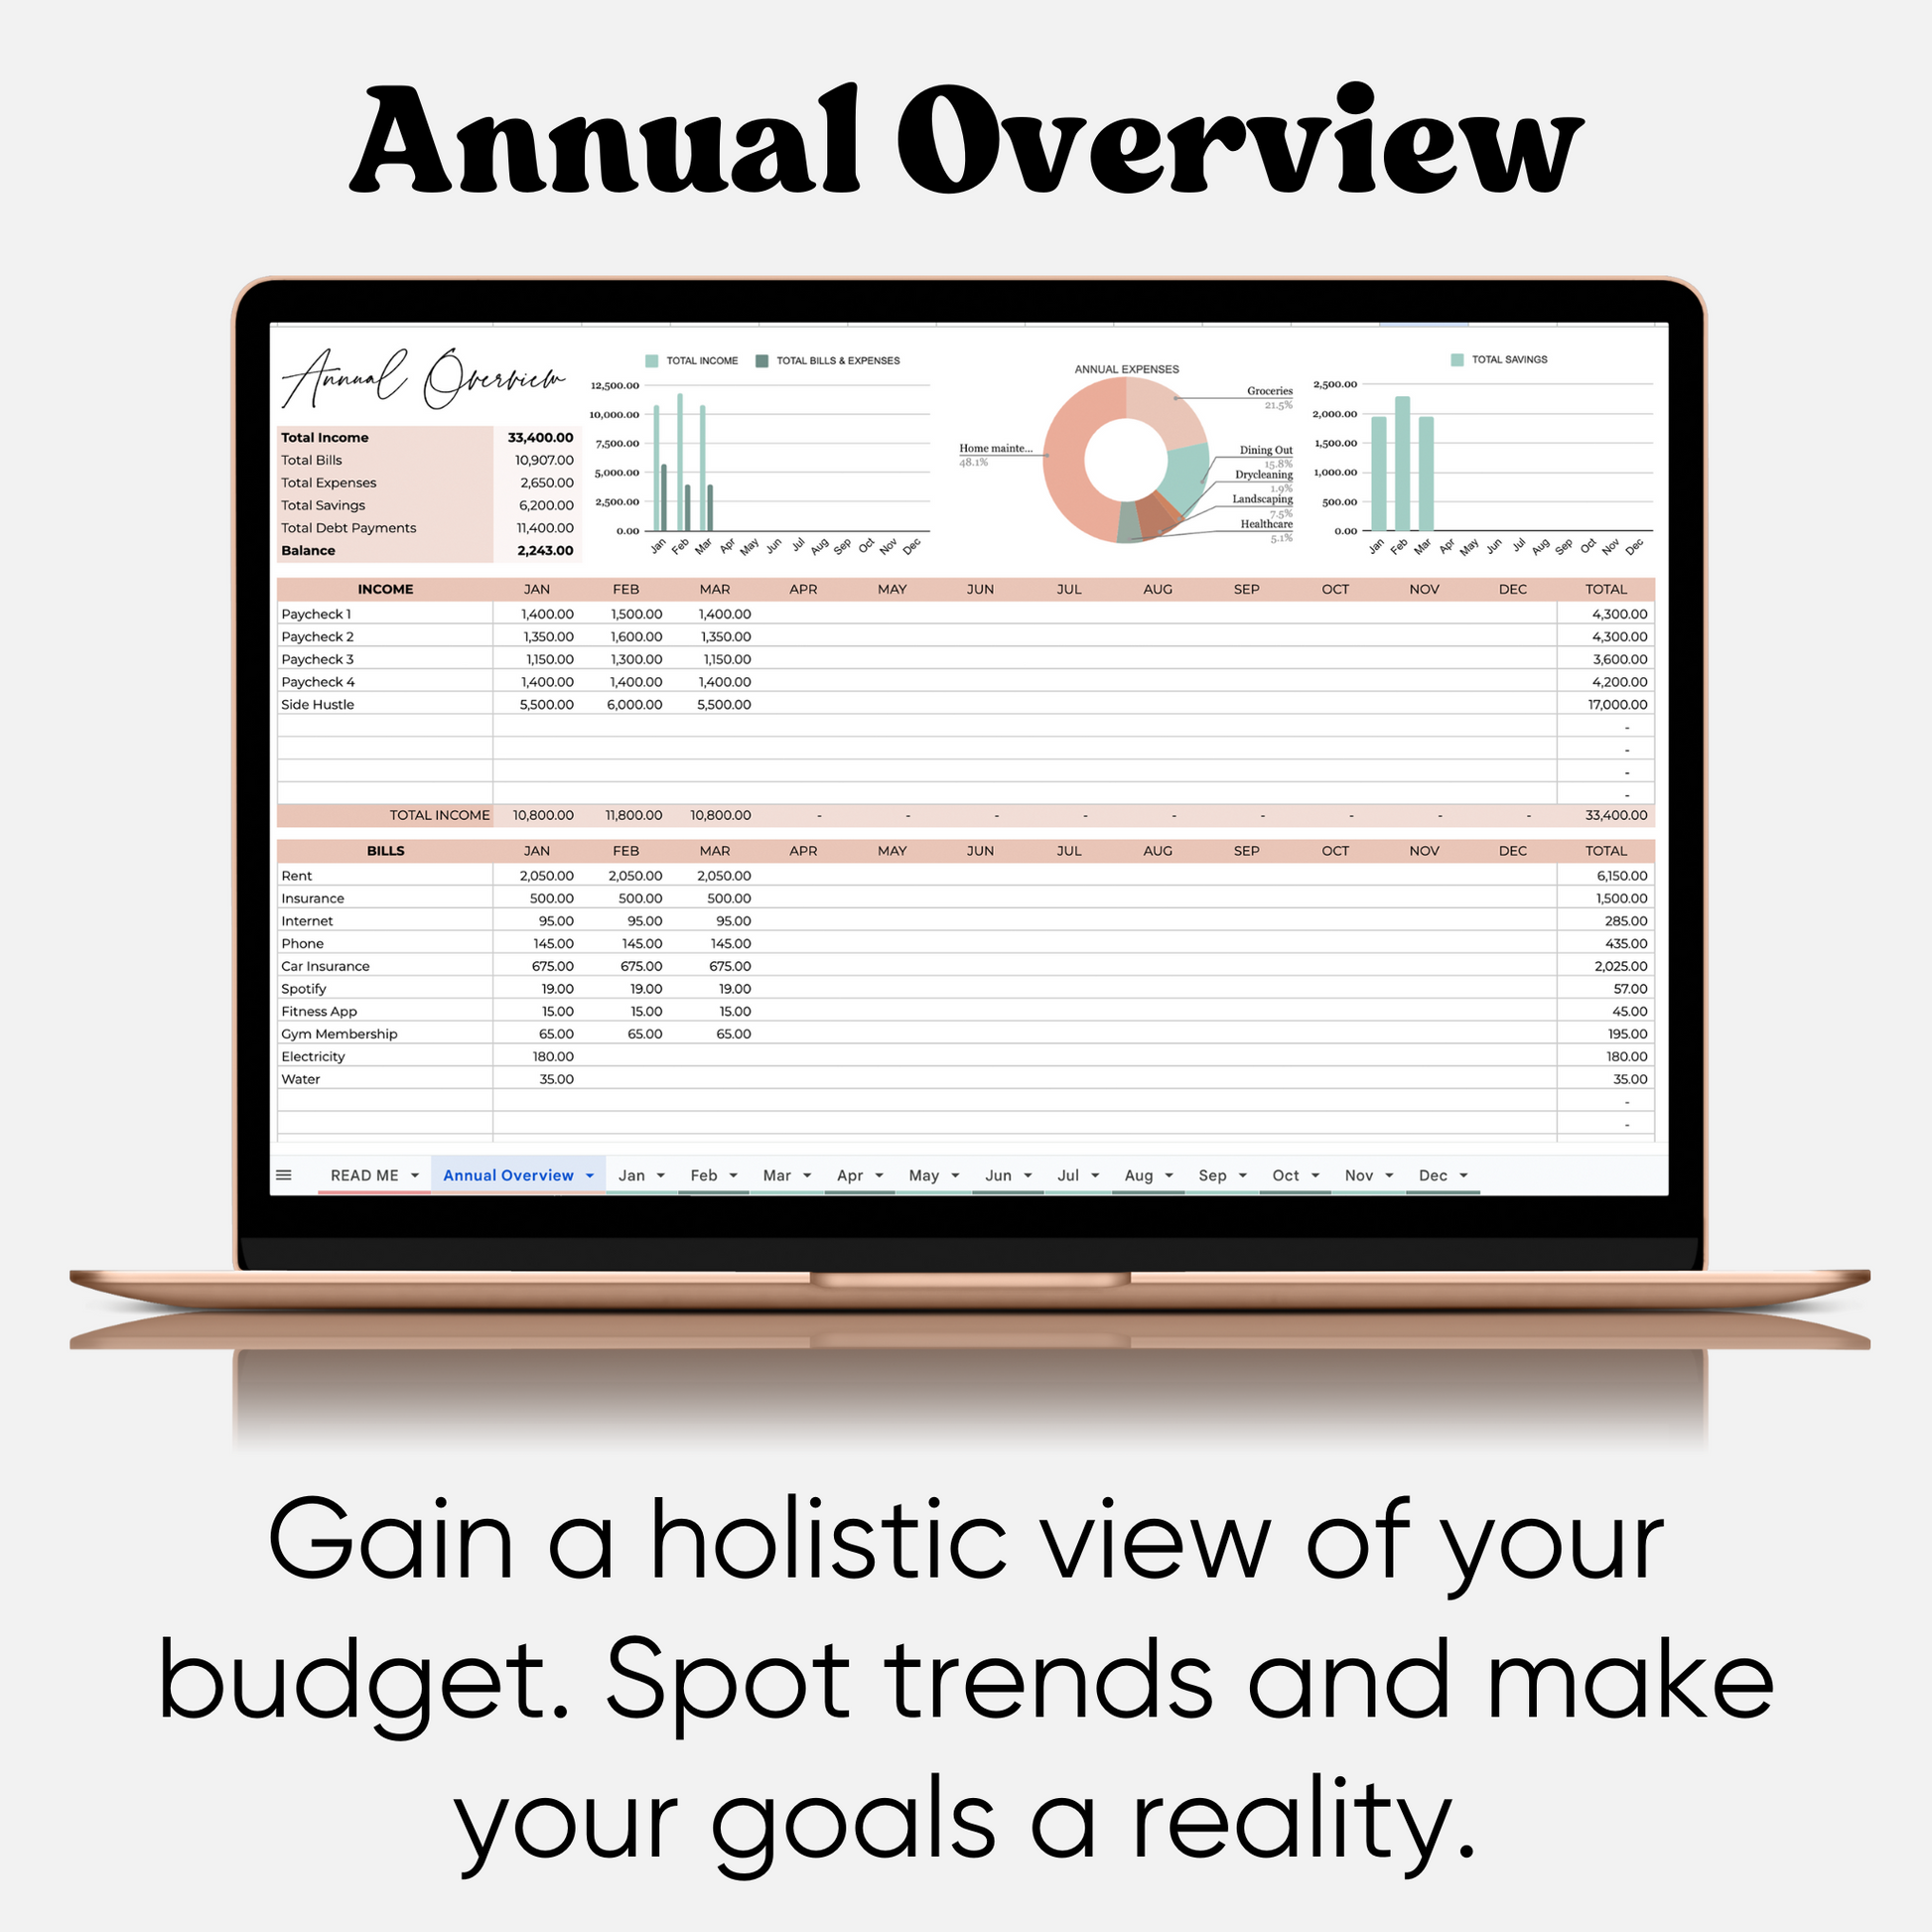 Screenshot of a user-friendly digital annual budget planner template in Google Sheets, showing categorized expense tracking, savings goals, and income management for effective personal finance planning. The spreadsheet makes managing your budget easy and efficient.